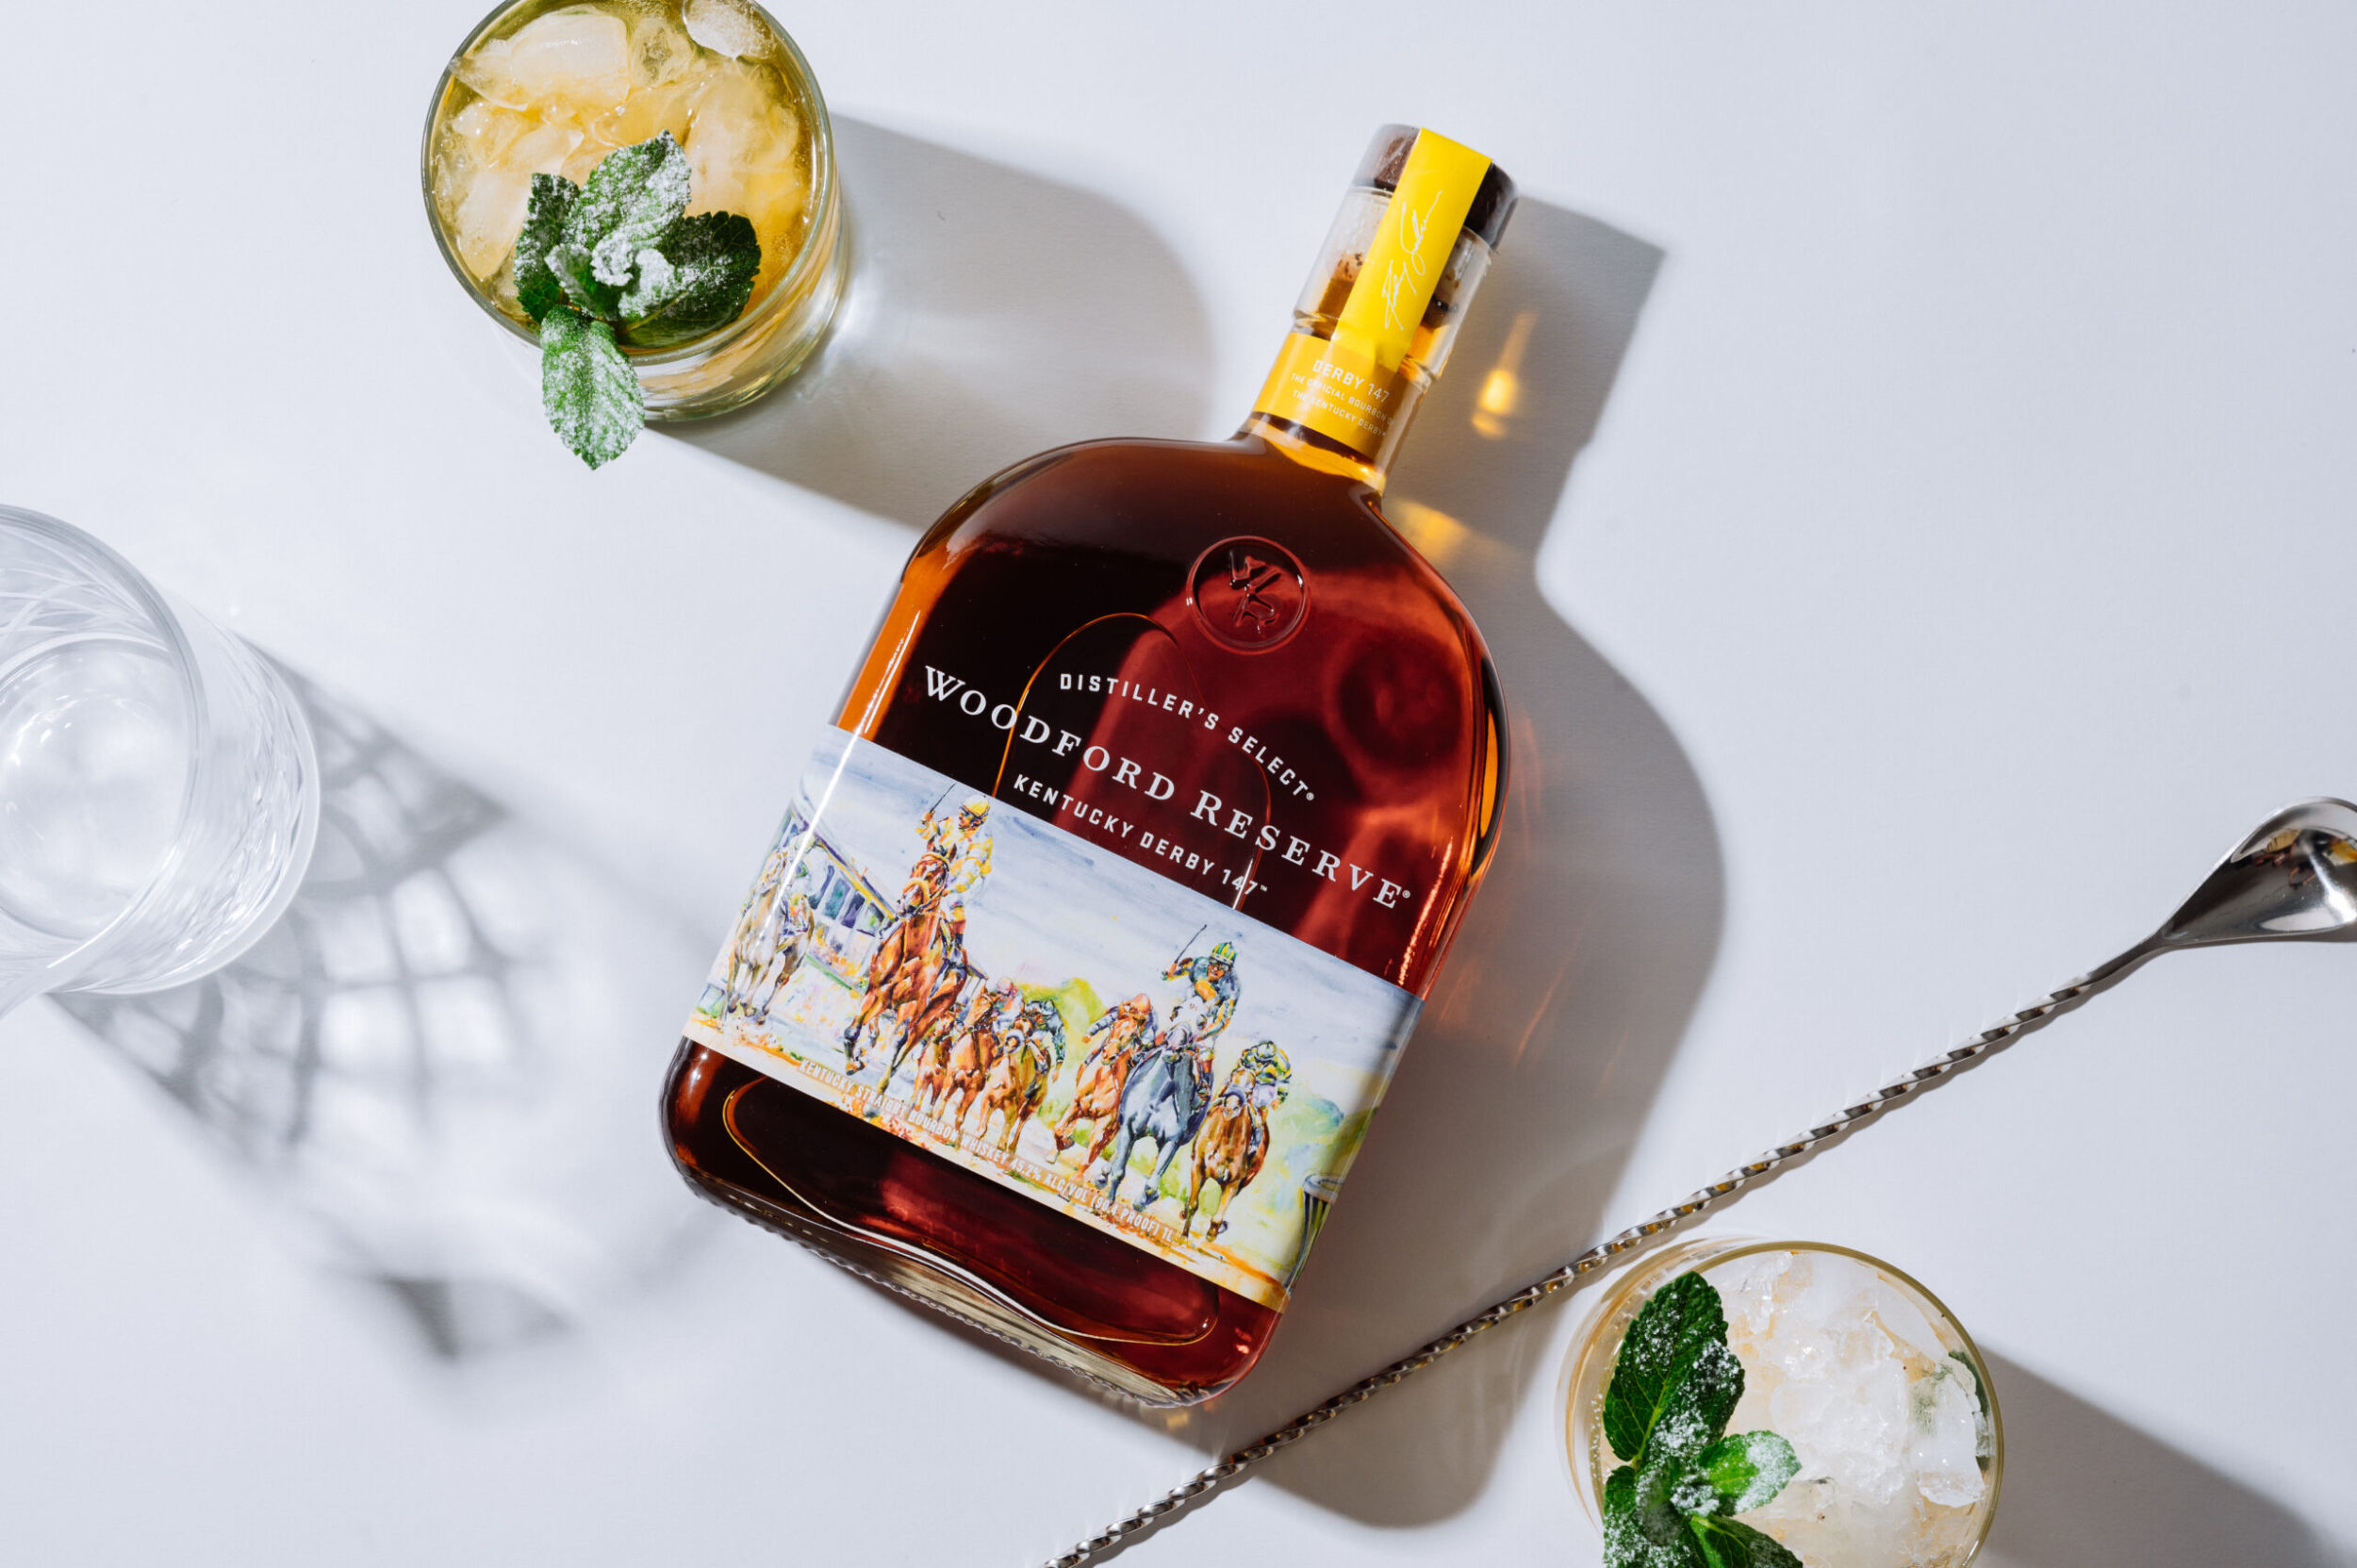 Woodford Reserve Kentucky Derby Edition No 147